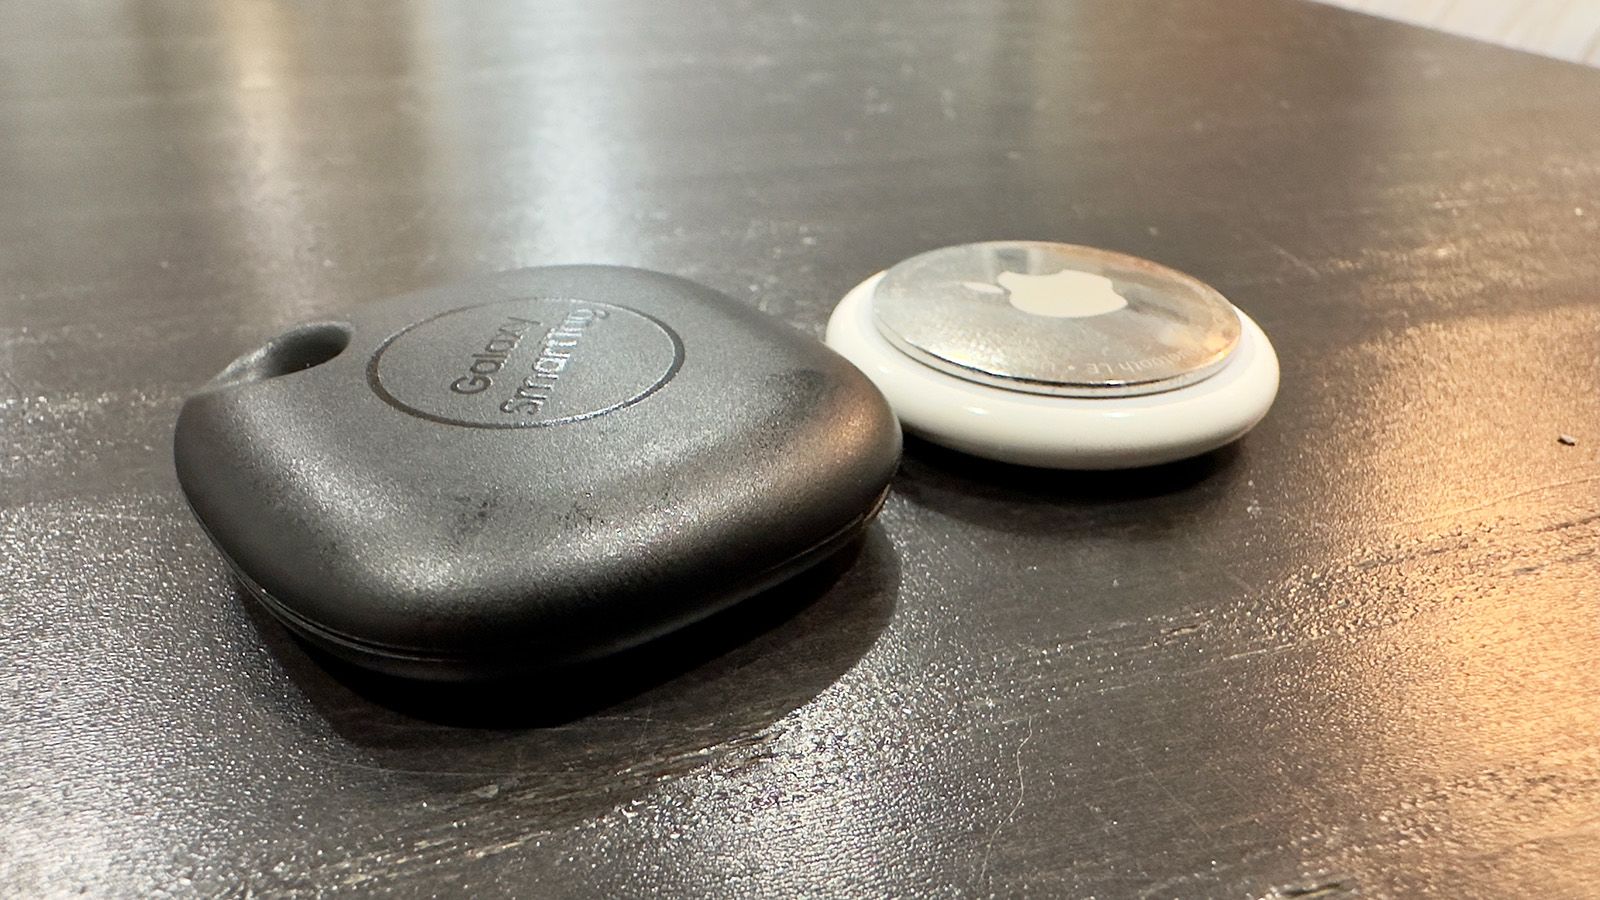 Samsung Galaxy SmartTag Plus review: A great AirTags alternative